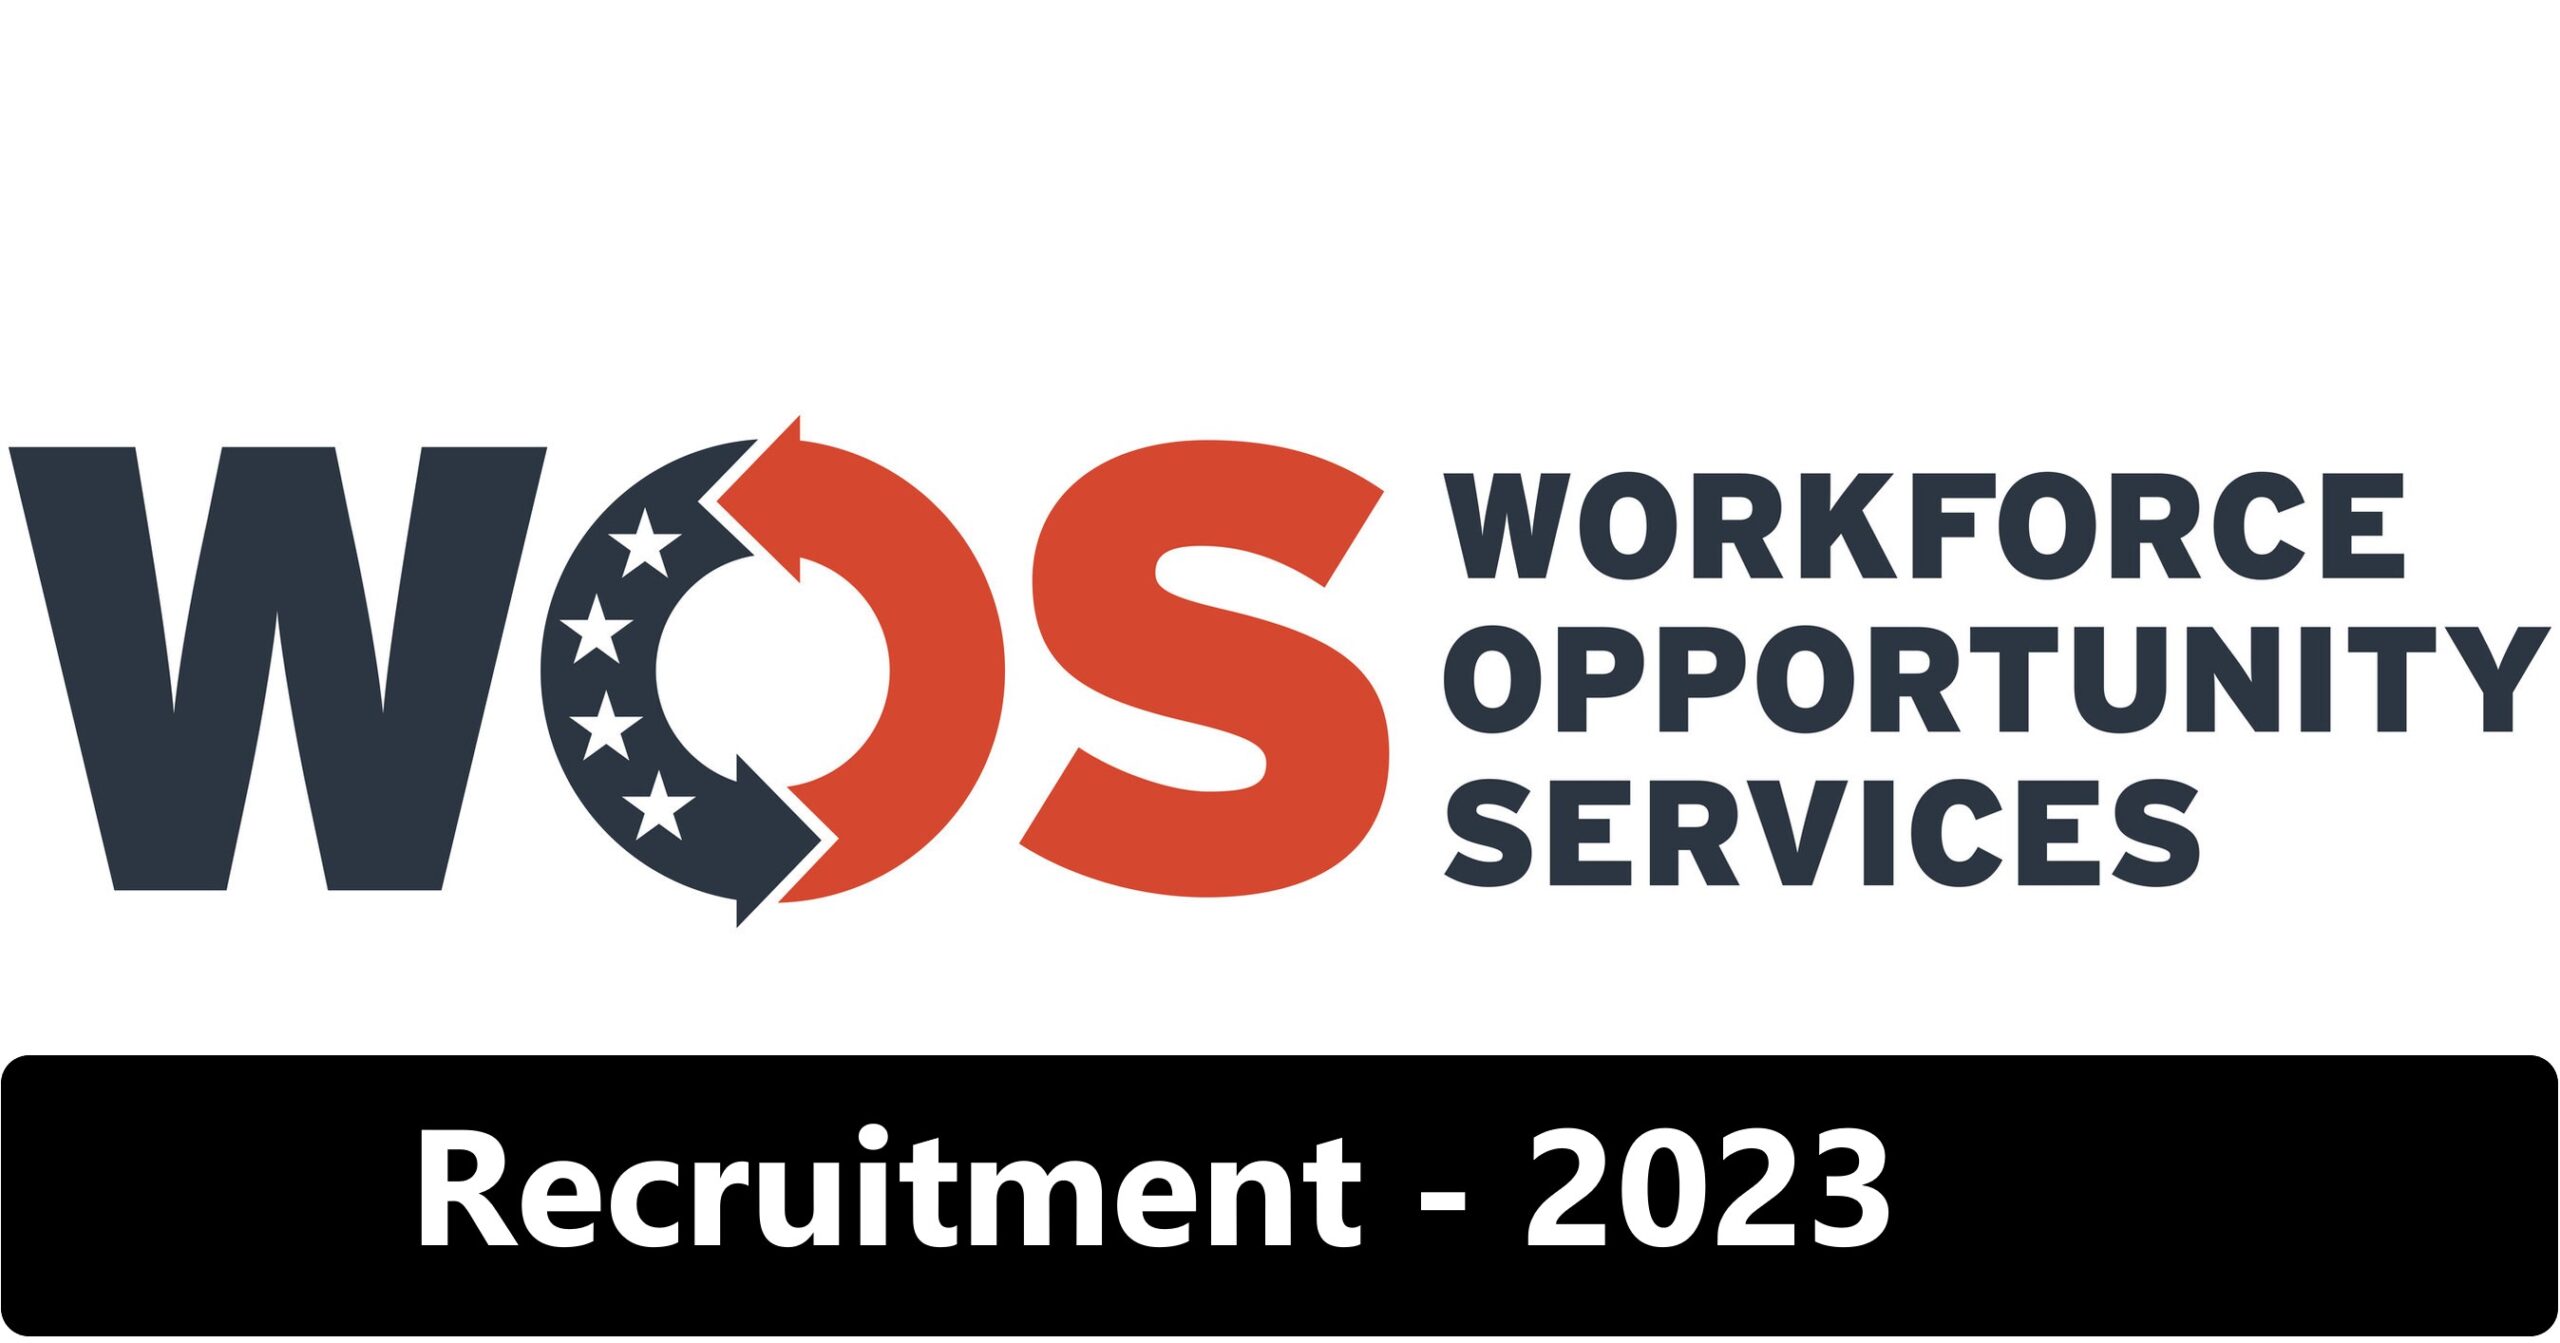 Workforce Opportunity Services